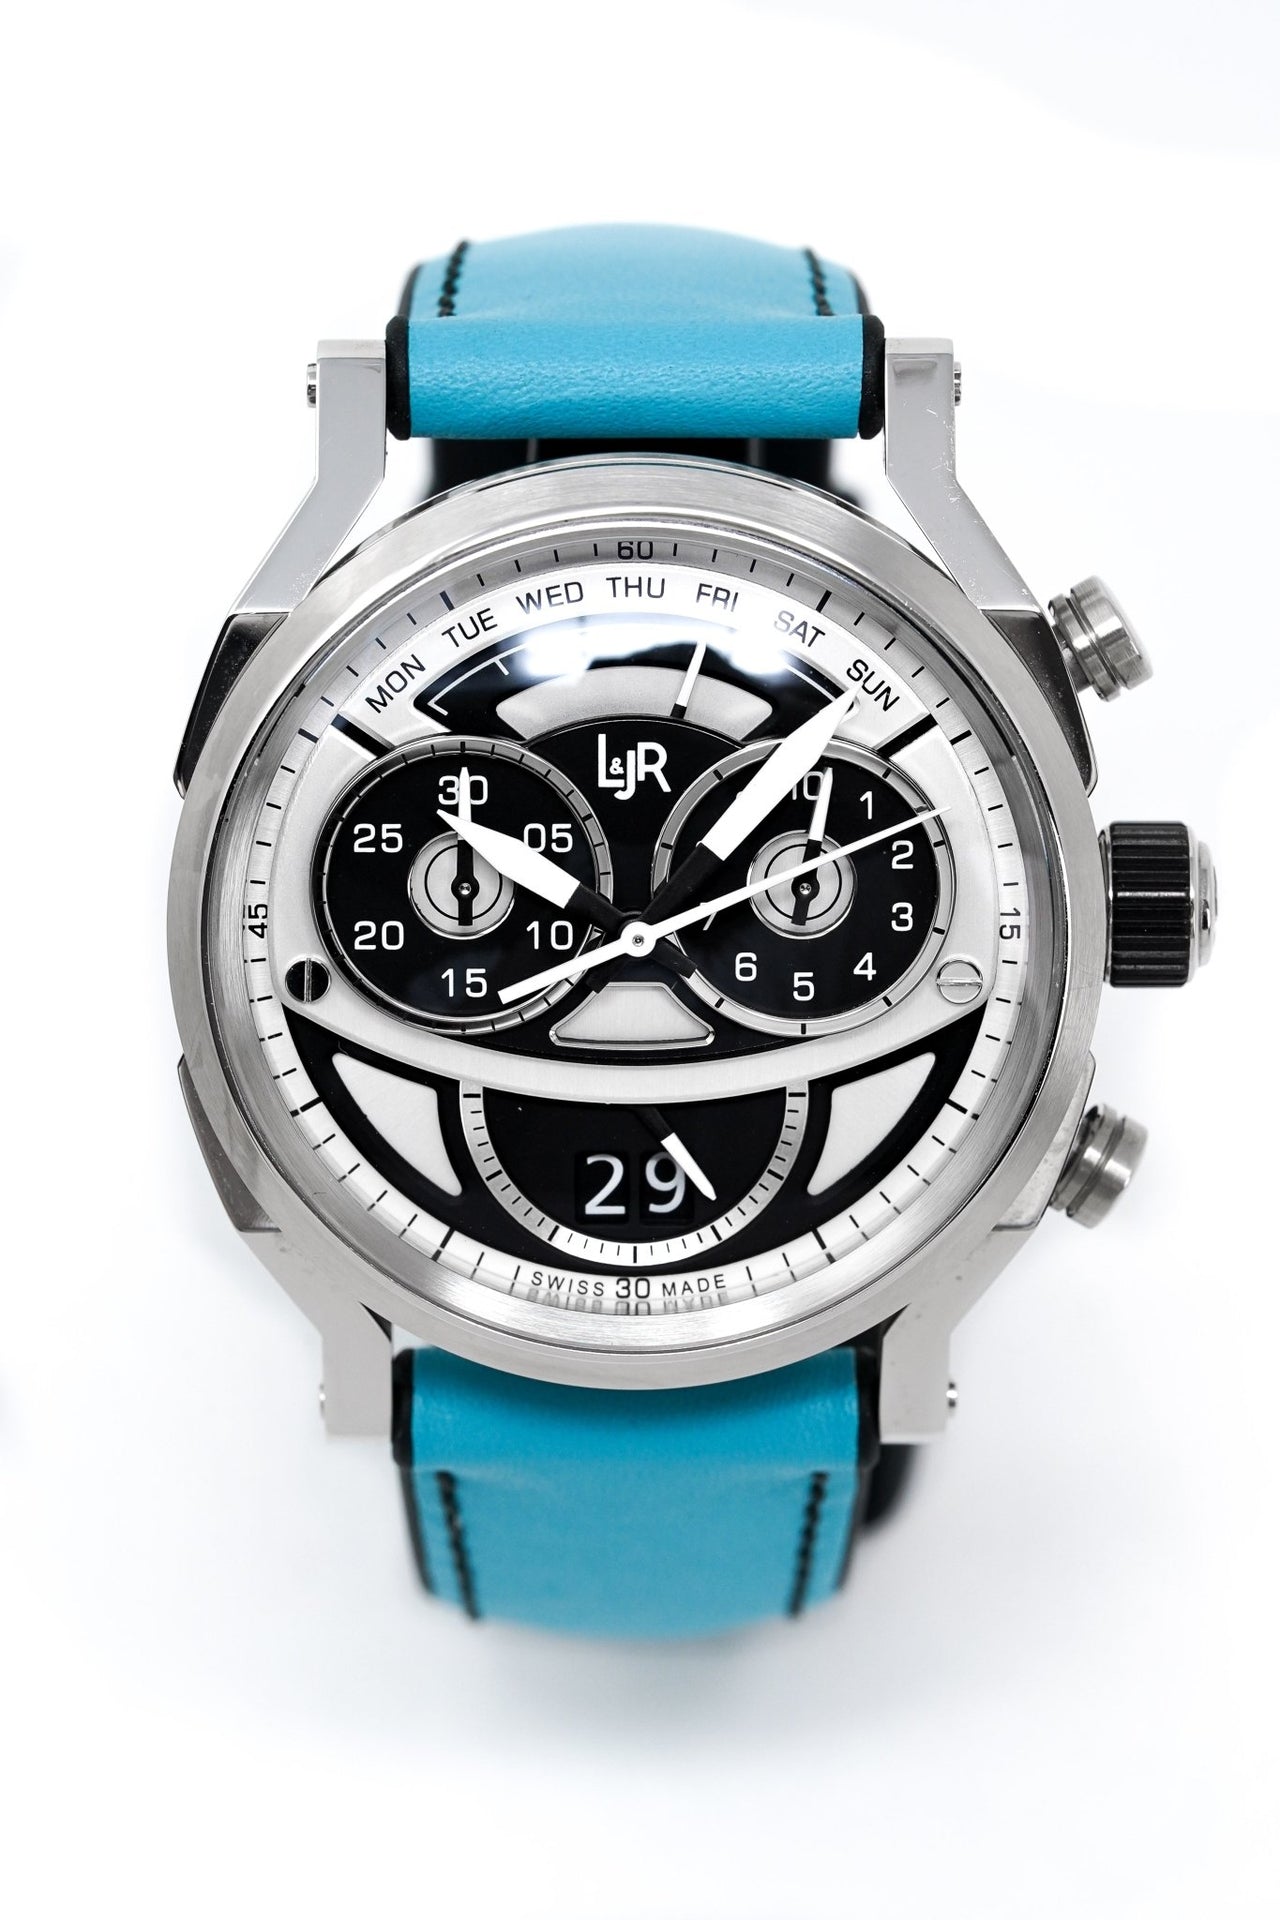 L&Jr Men's Watch Chronograph Day and Date 2 Tone Blue - Watches & Crystals